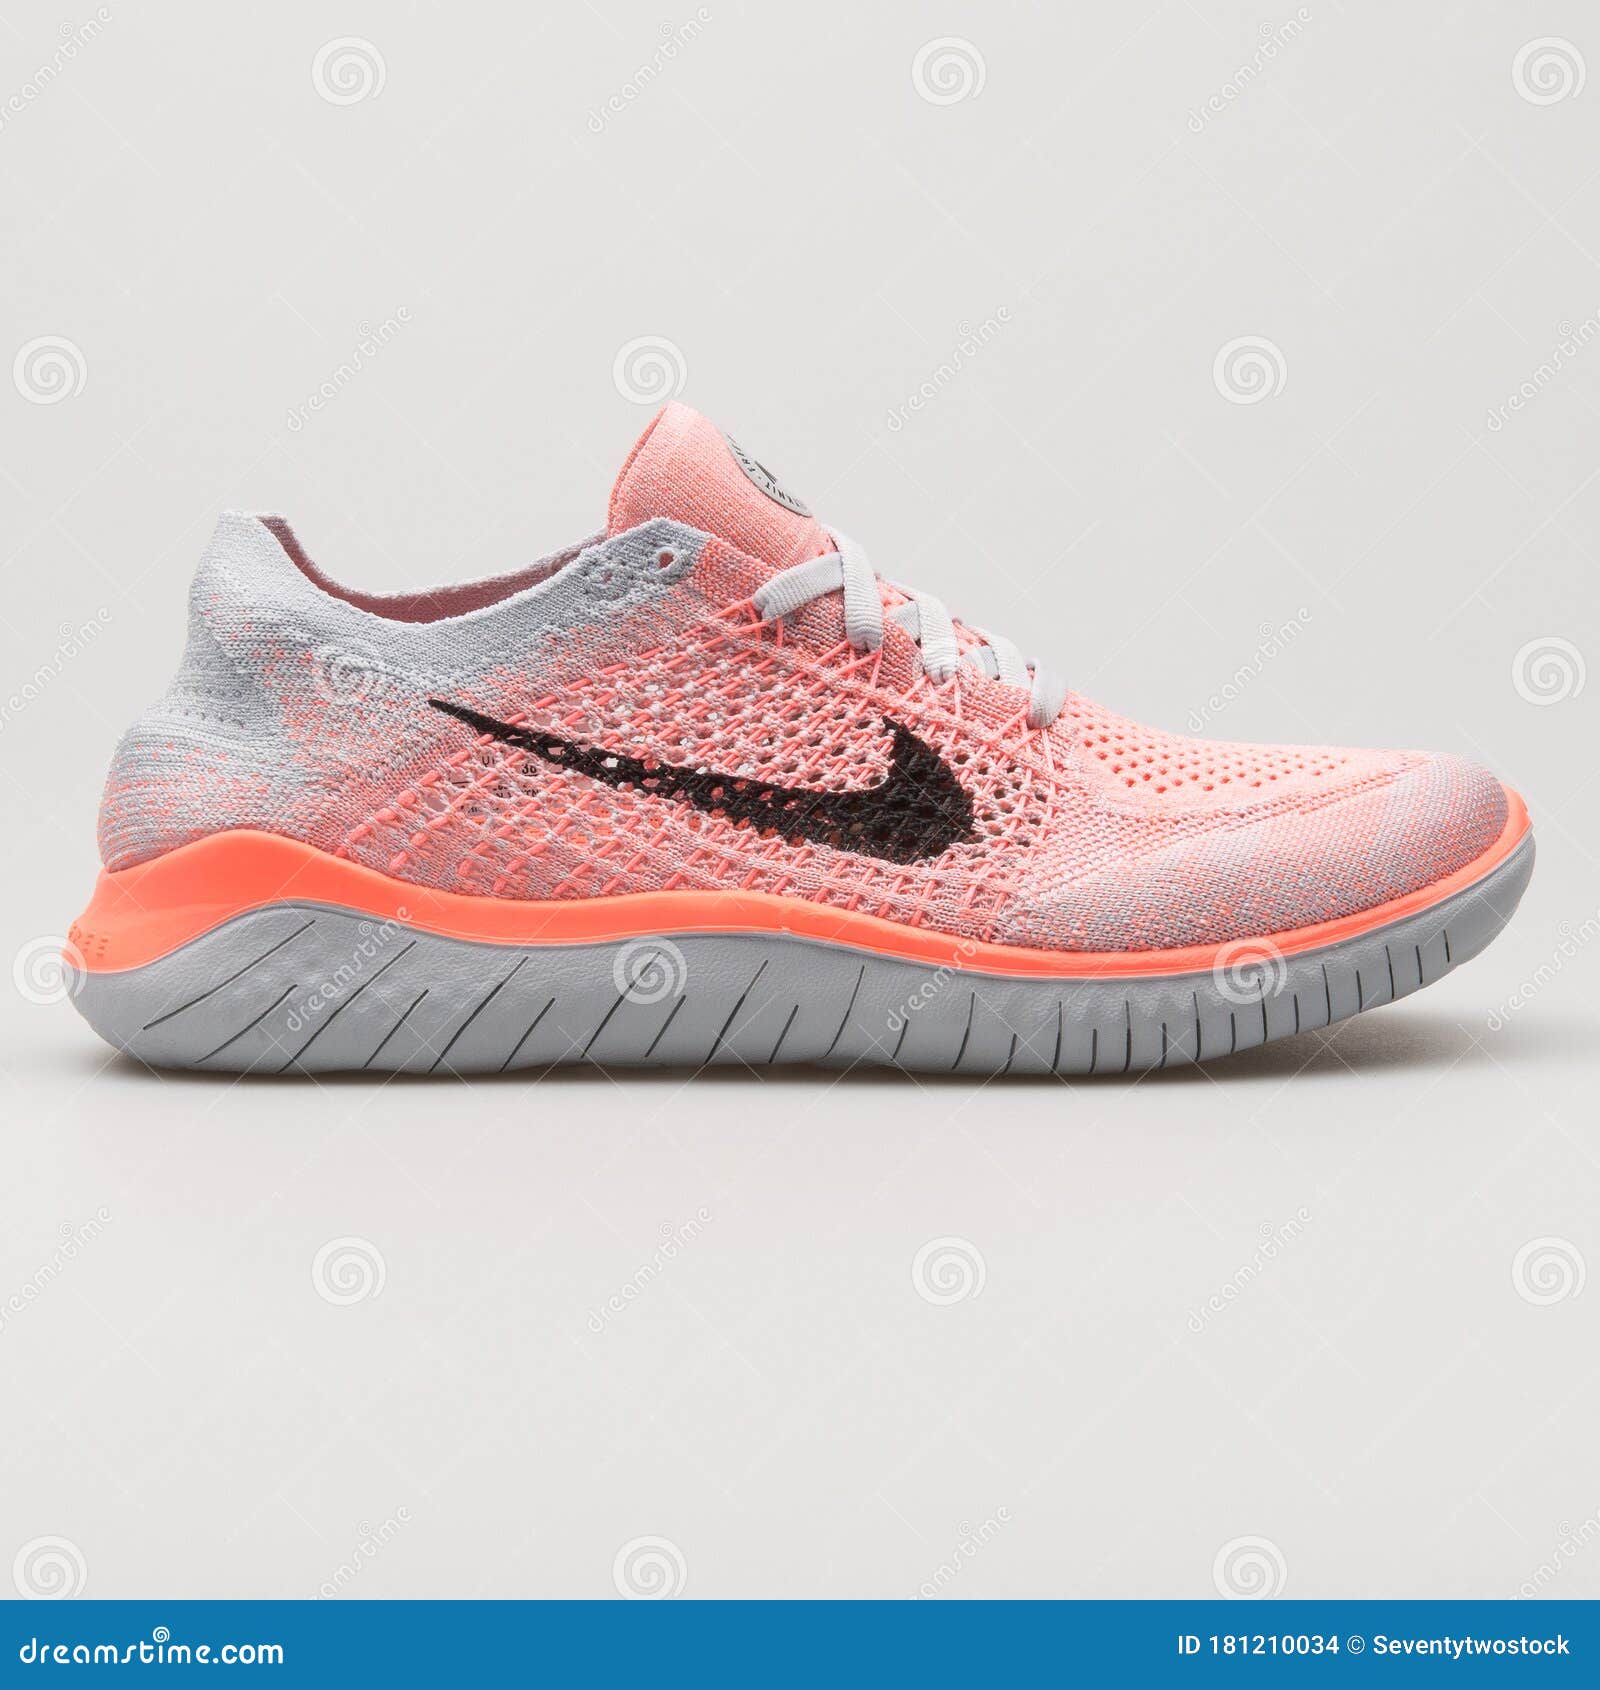 Nike Free Flyknit 2018 Pink and Grey Sneaker Editorial Stock Image - Image color, equipment: